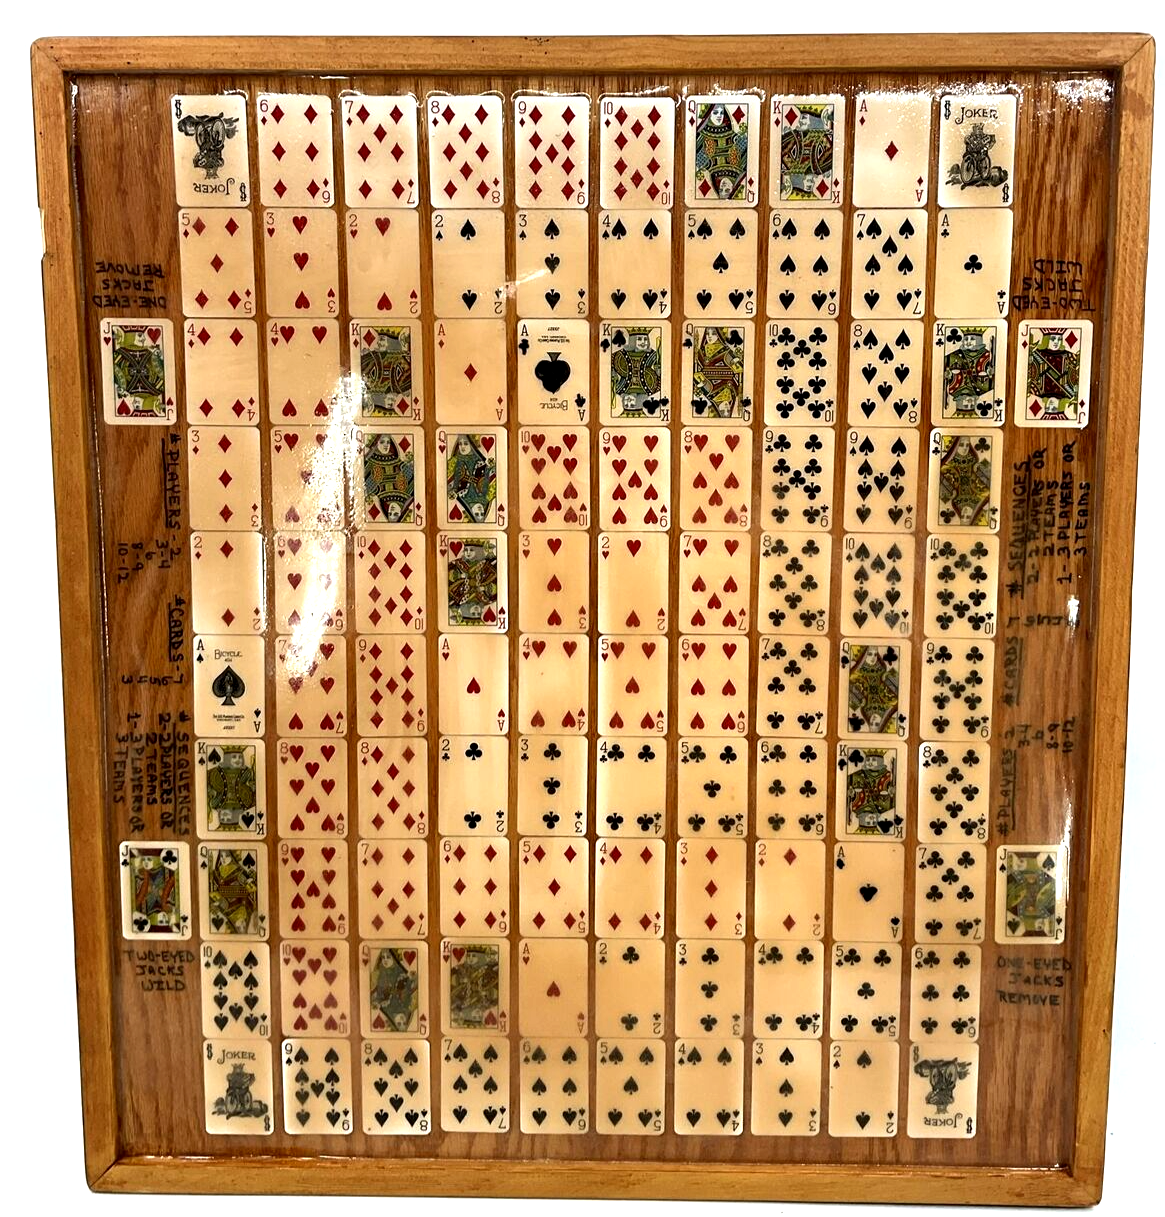 Primary image for Vintage Antique Homemade SEQUENCE Board Game Wooden Glossy Cards One-Eyed-Jacks